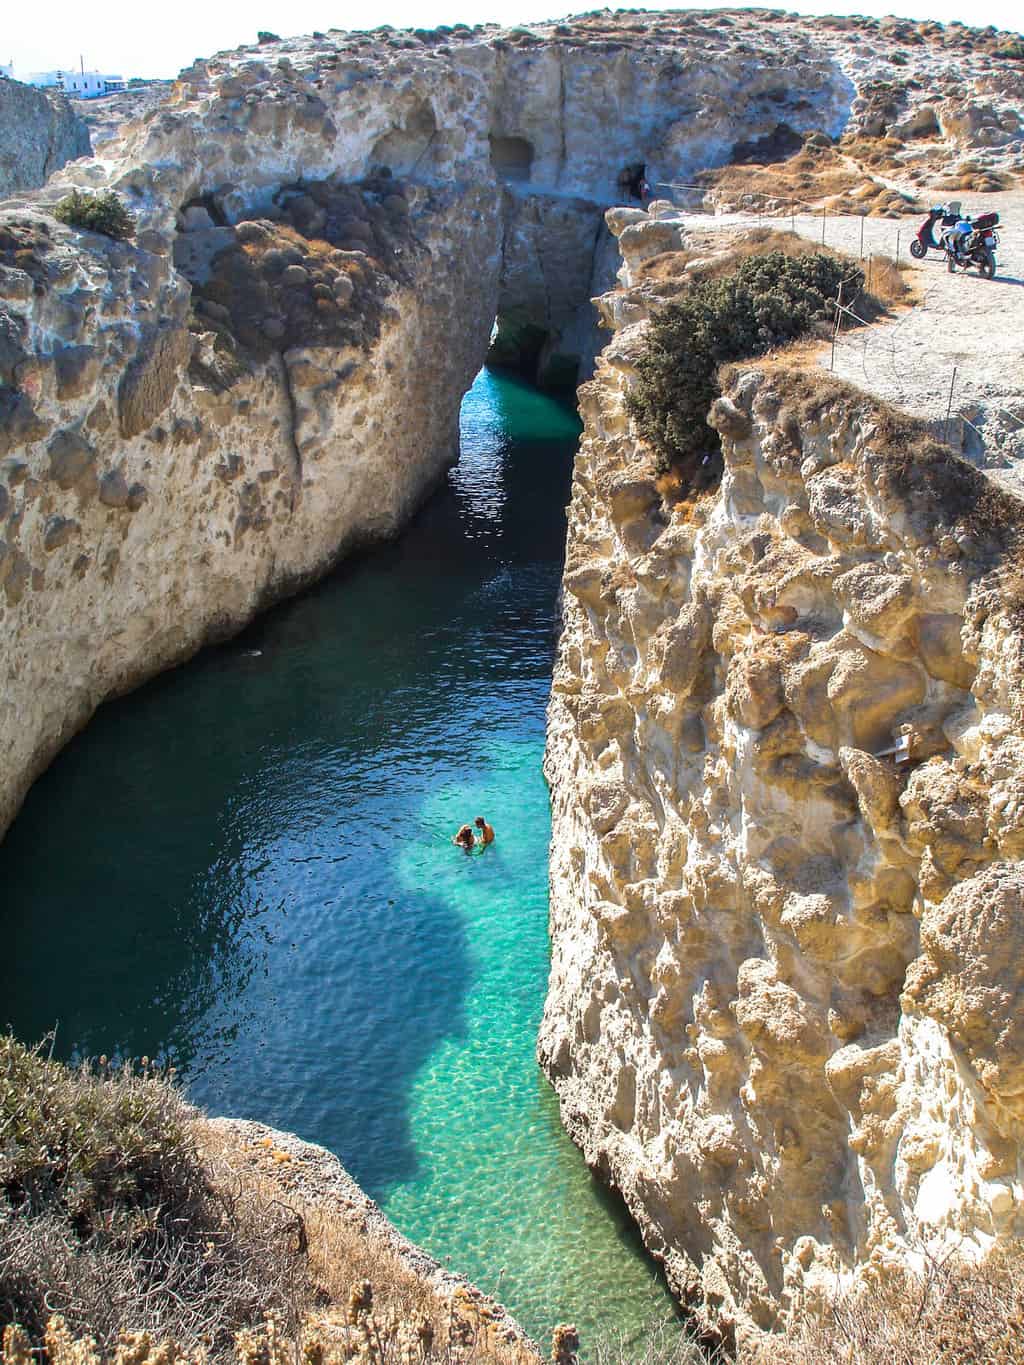 A couple swim in clear waters of Milos island surrounded by cliffs in an enclosed bay.  